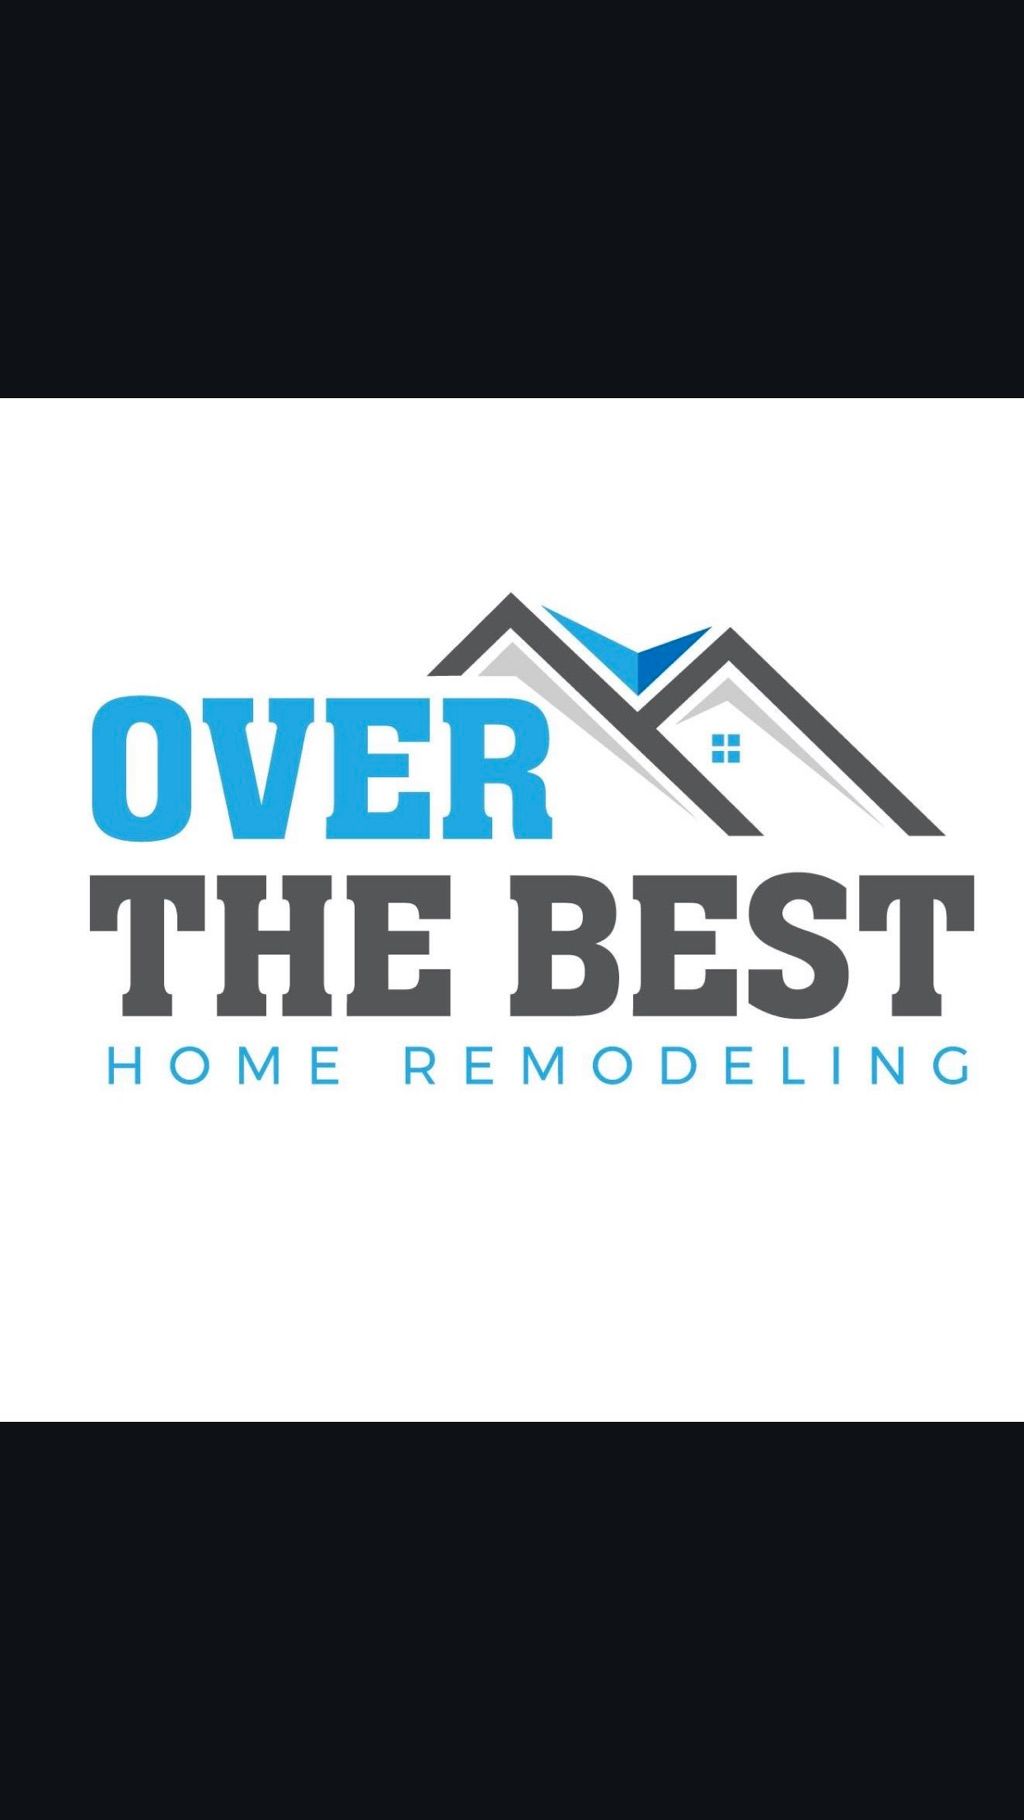 Over the Best Home Remodeling